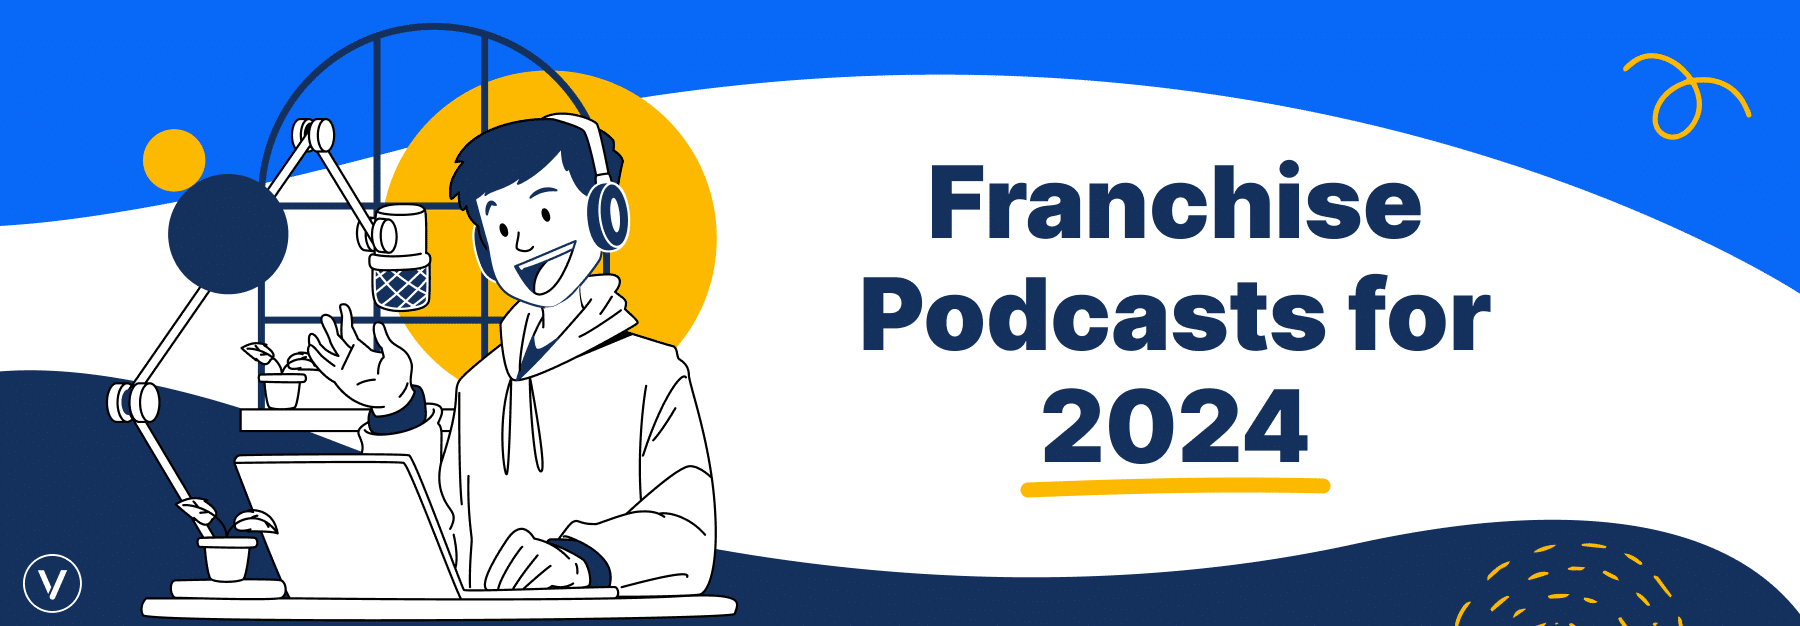 Franchise Podcasts For 2024